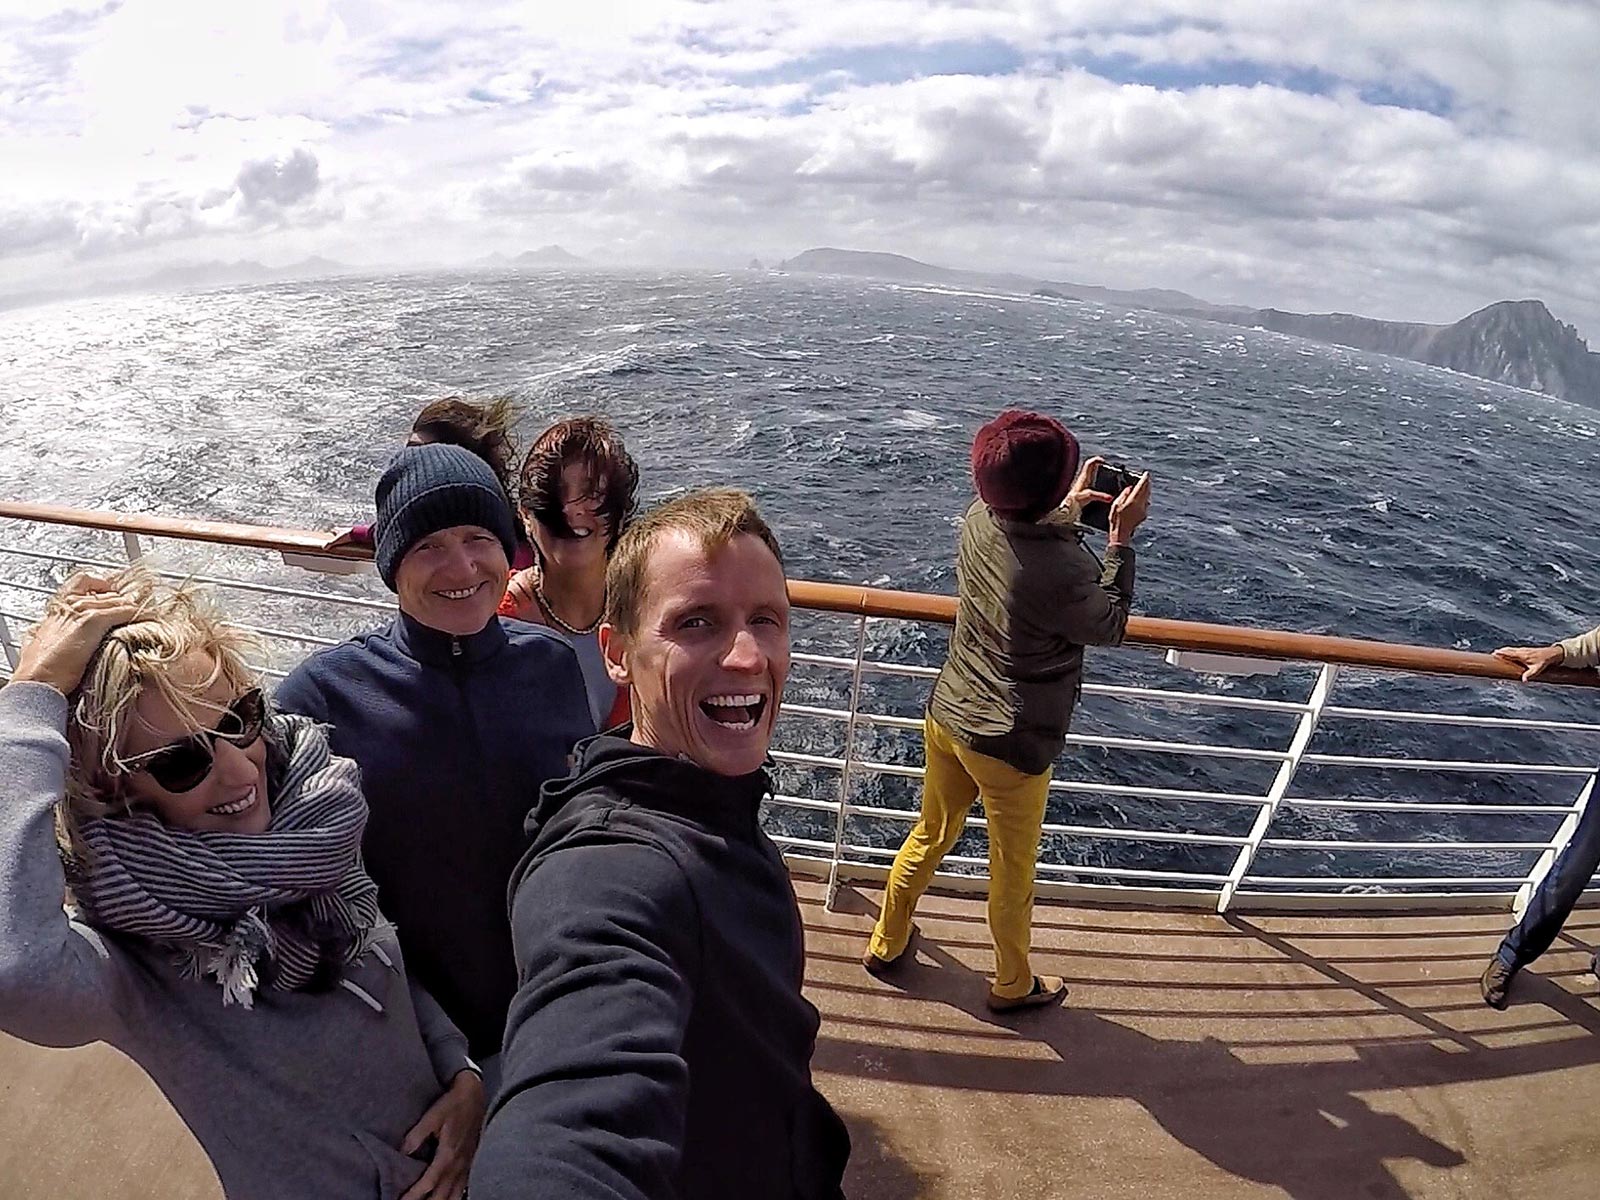 David Simpson and family viewing Cape Horn, Chile. Cape Horn on the Cruise to the end of the world